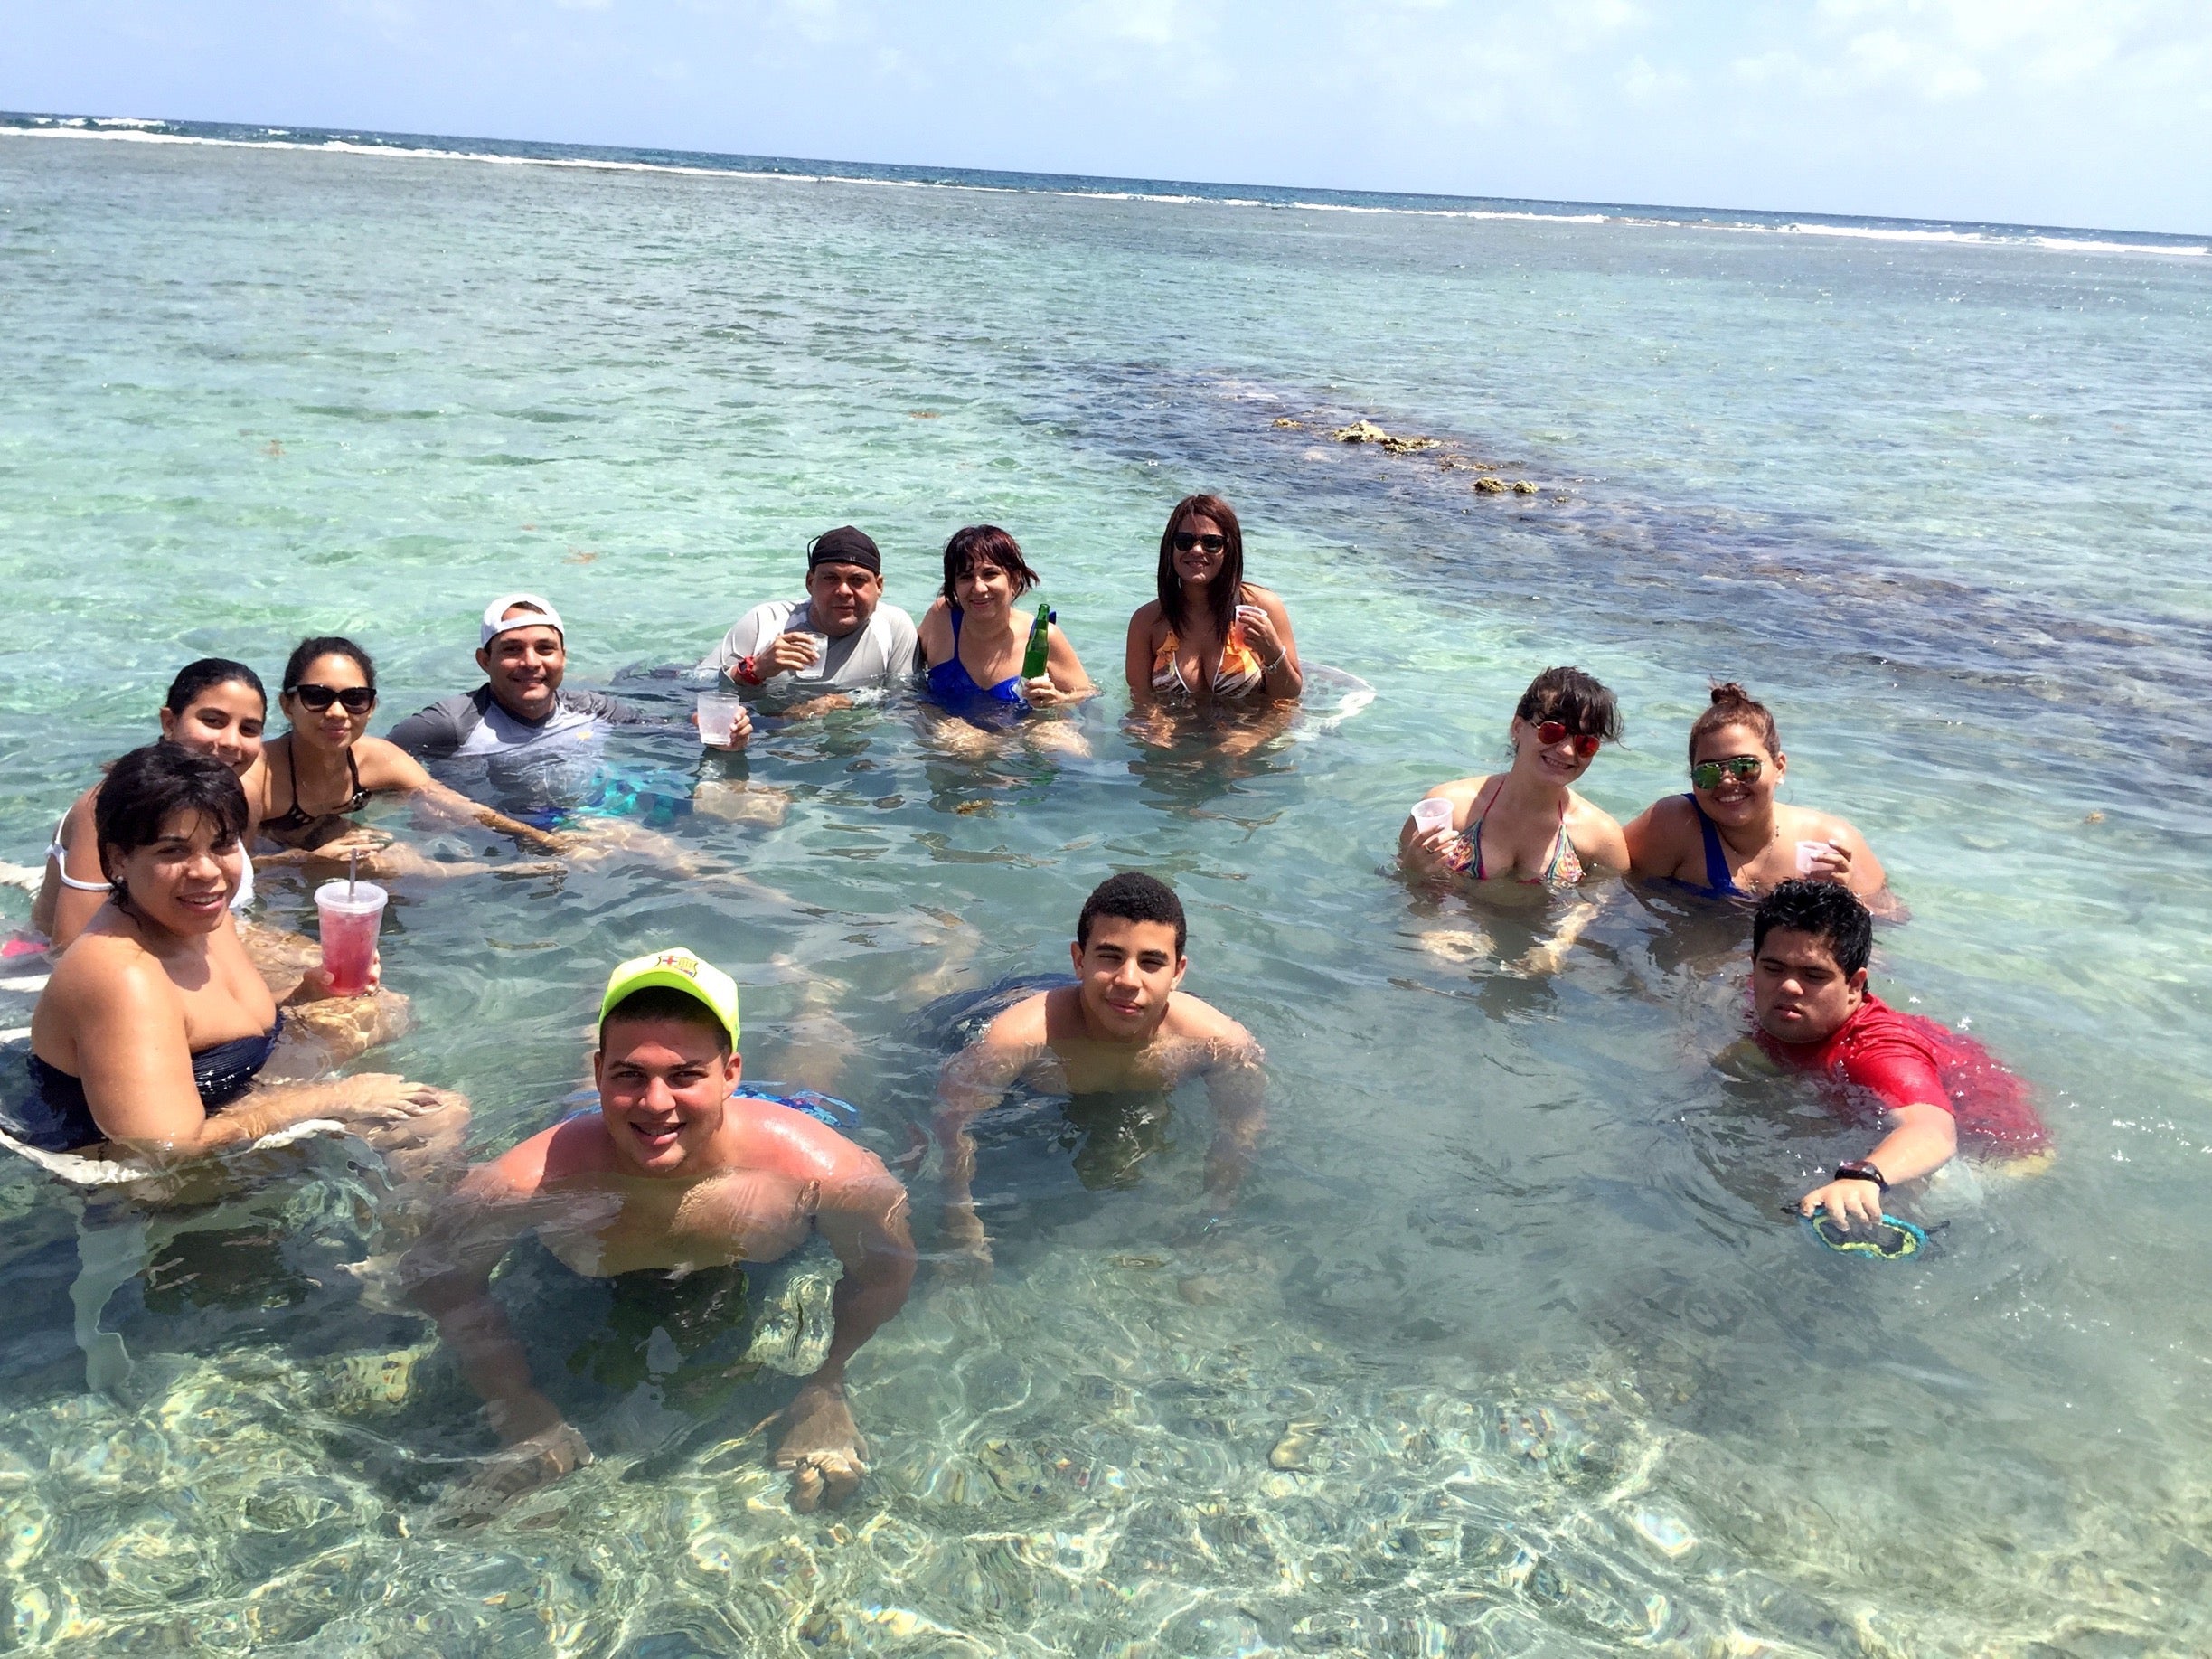 In the Dominican Republic we know how to have a great time!